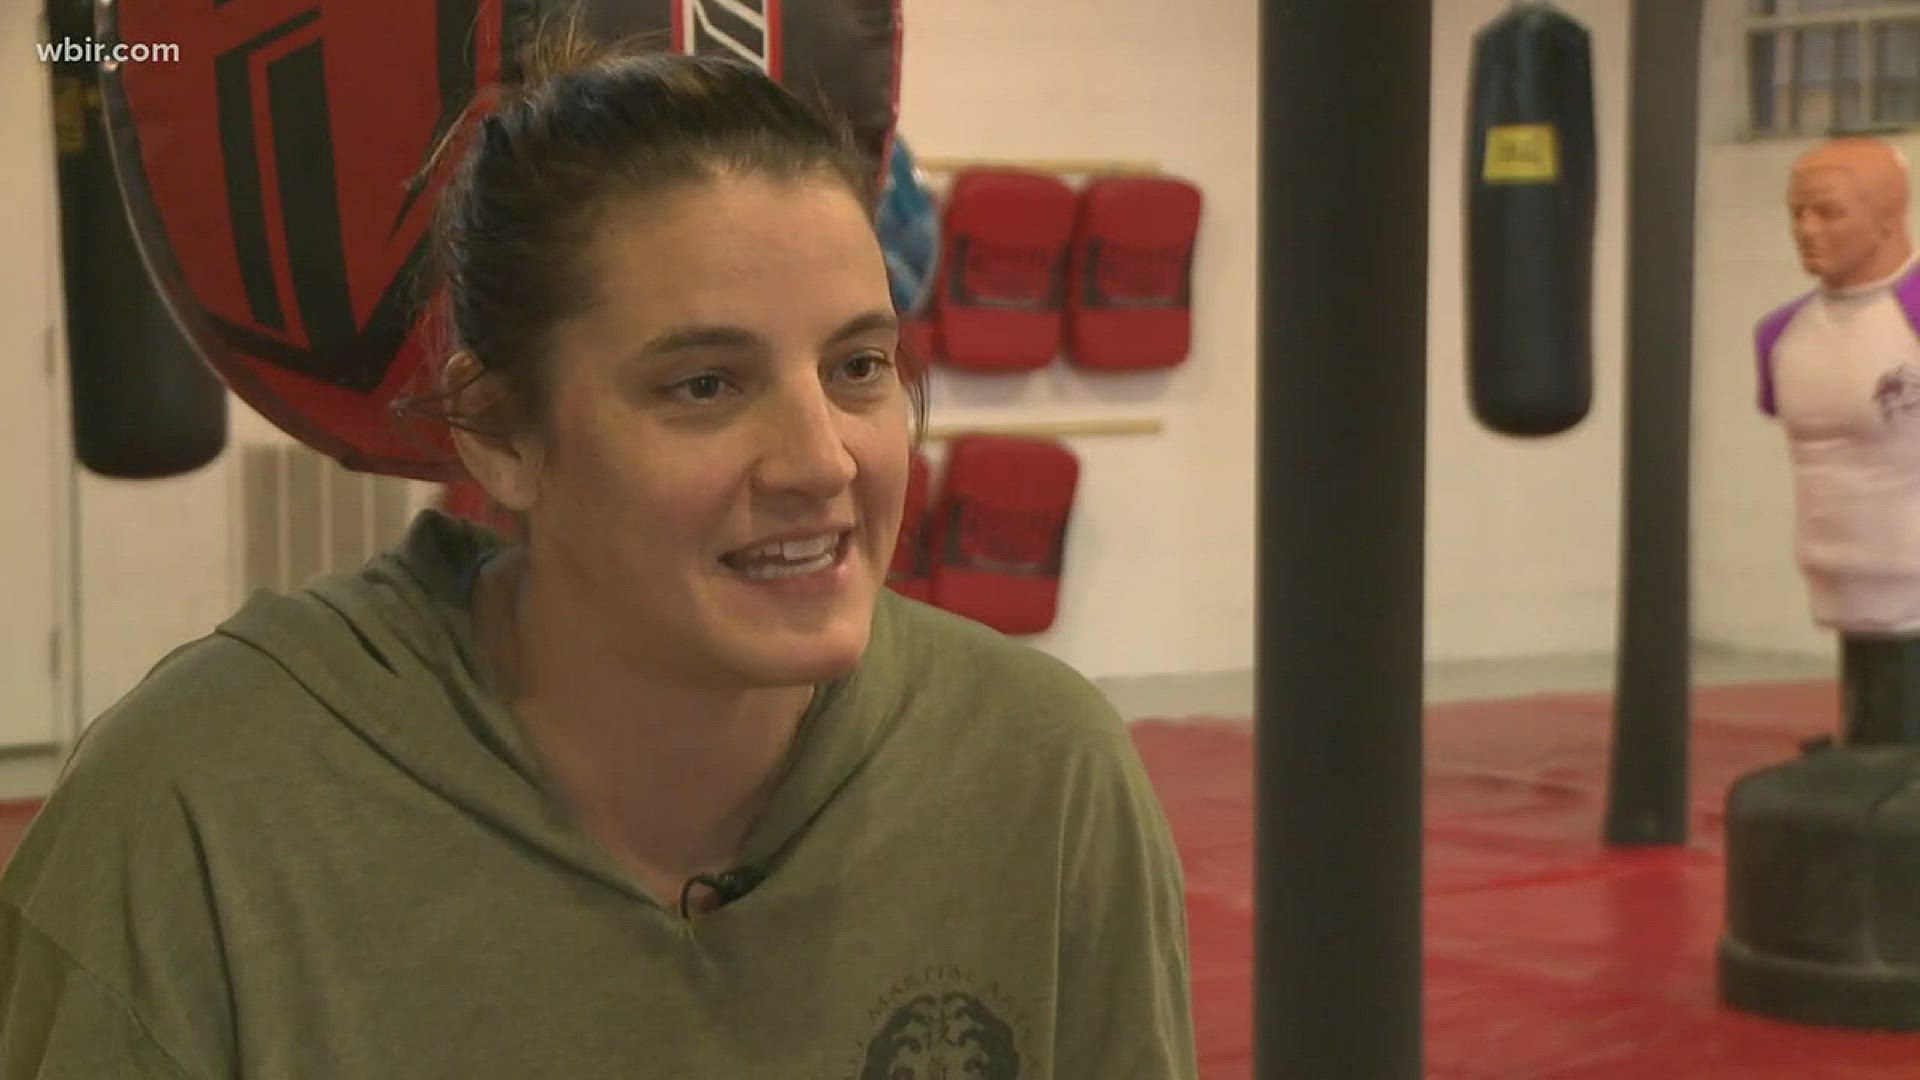 An East Tennessee school teacher found a love for MMA while on a journey to lose weight.